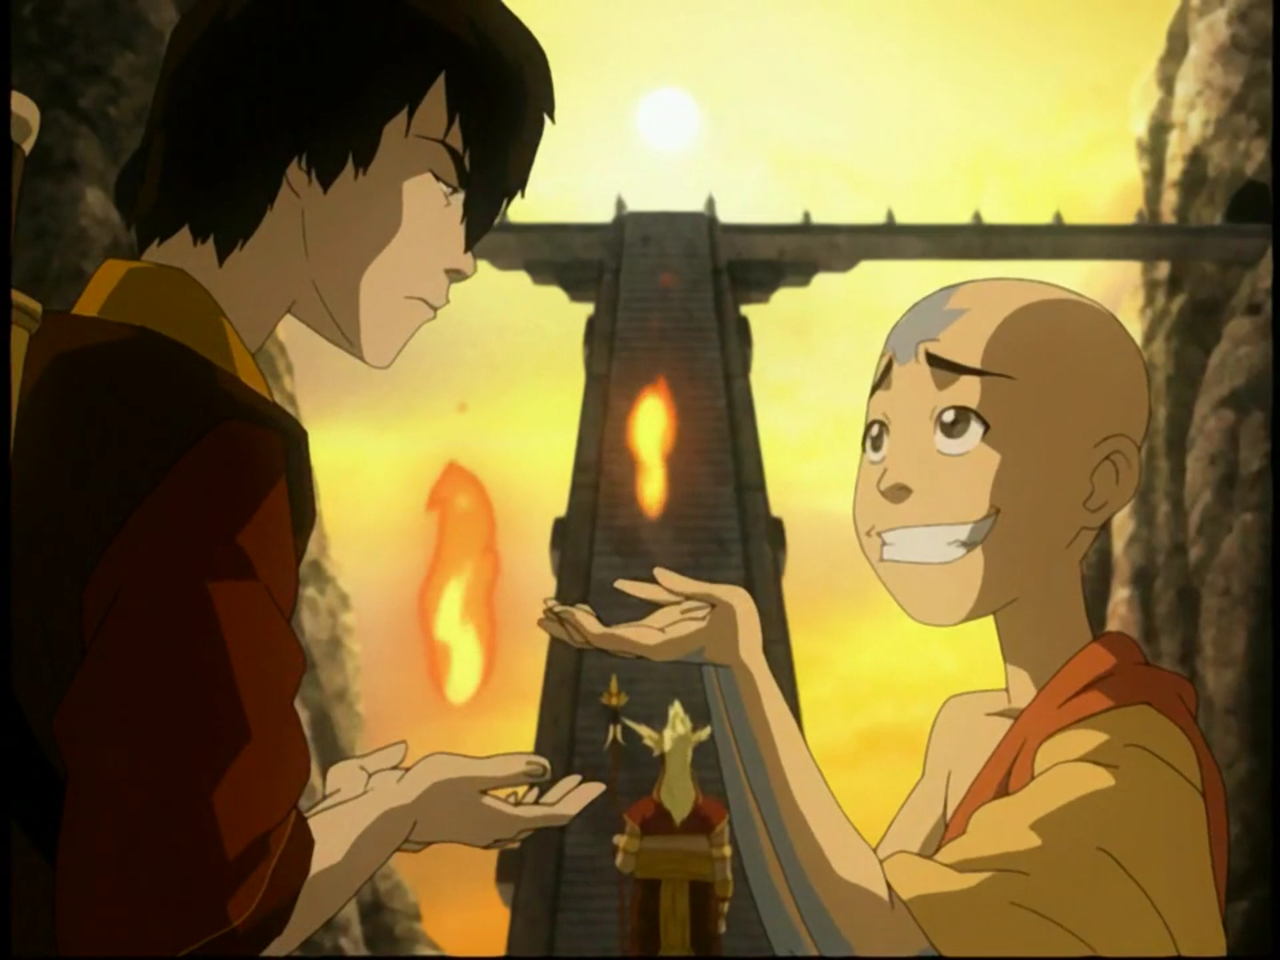 Aang and Zuko are learning the origins of firebending.